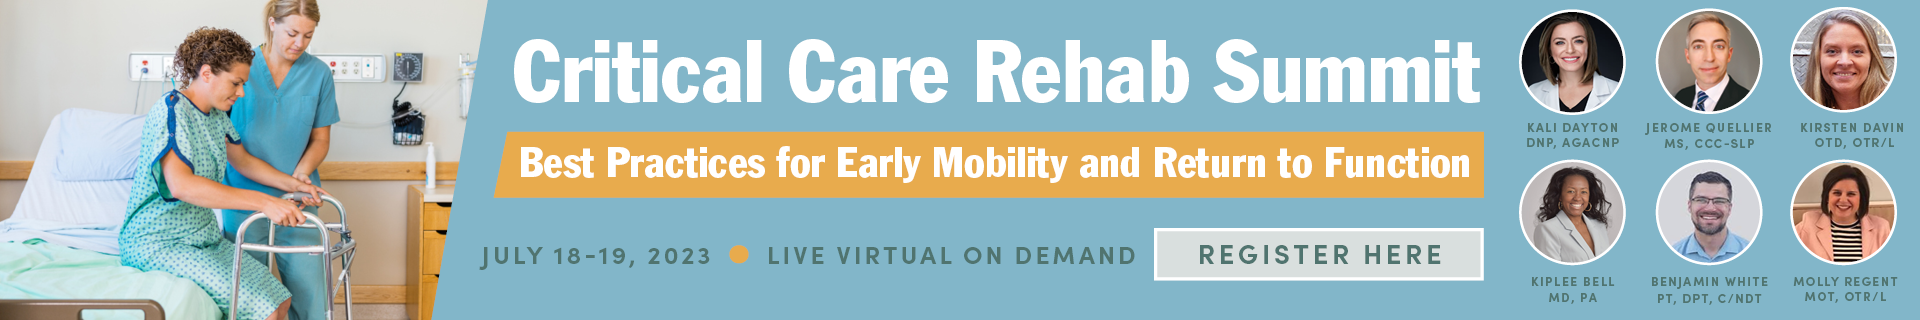 Critical Care Rehab Summit: Best Practices for Early Mobility and Return to Function